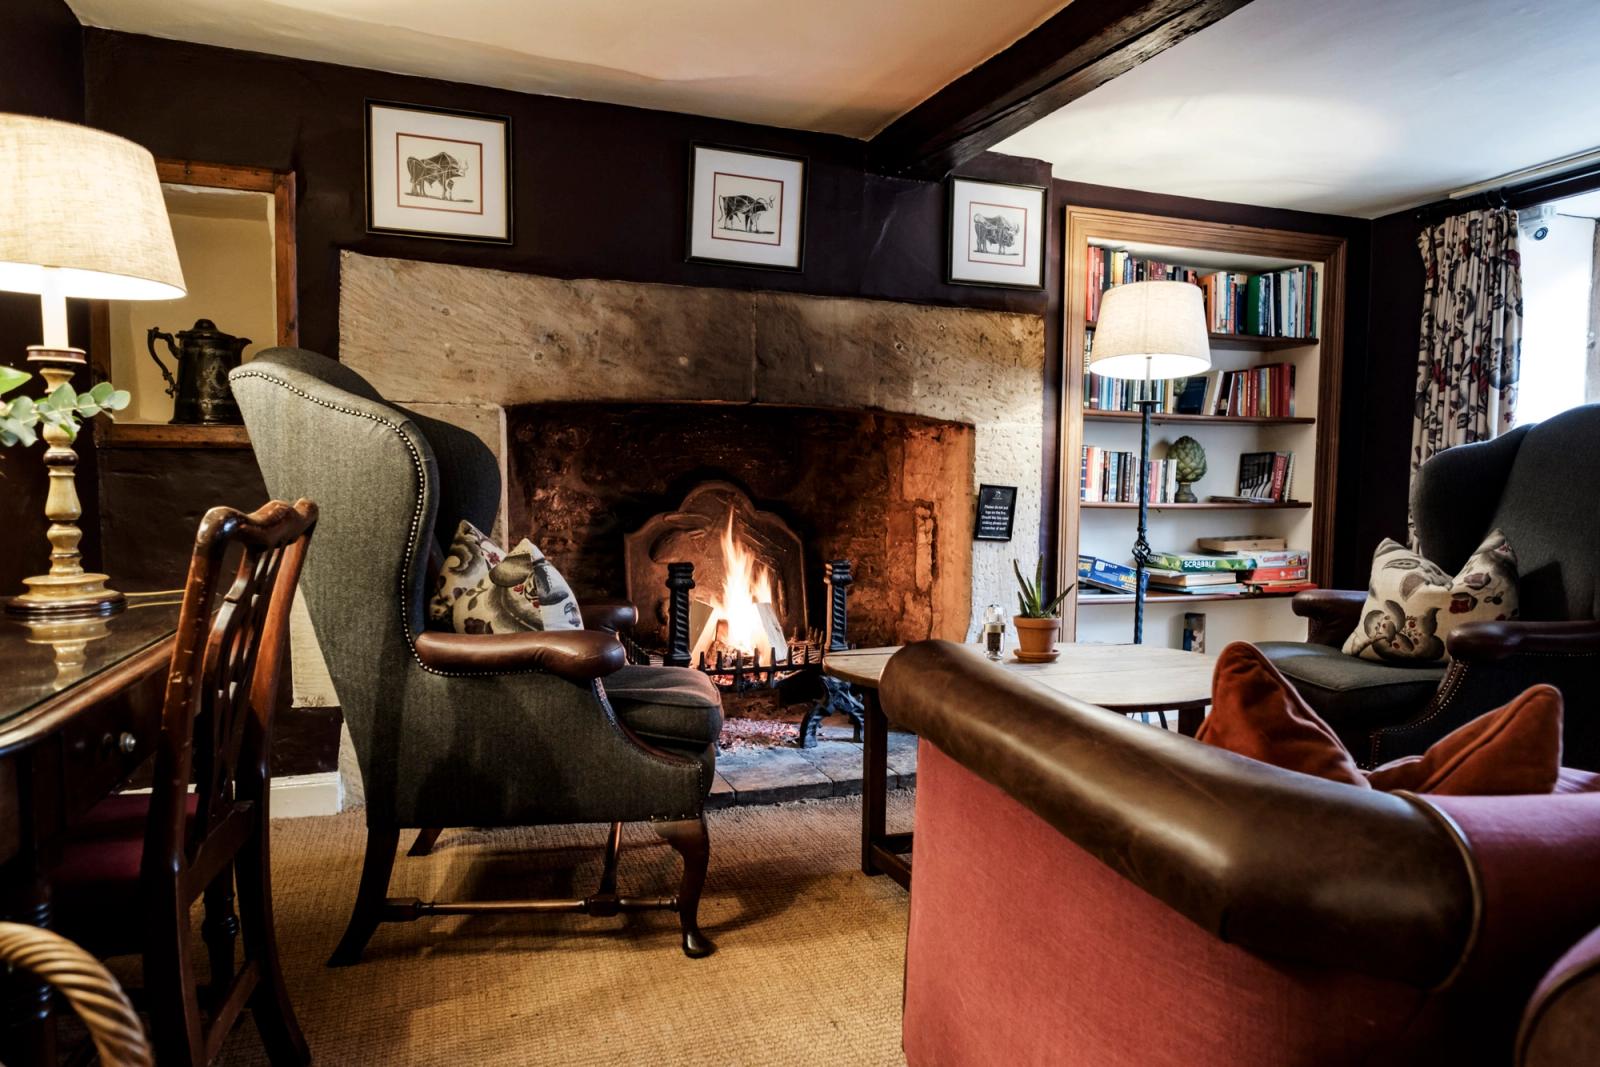 The UK’s best gastro pubs-with-rooms